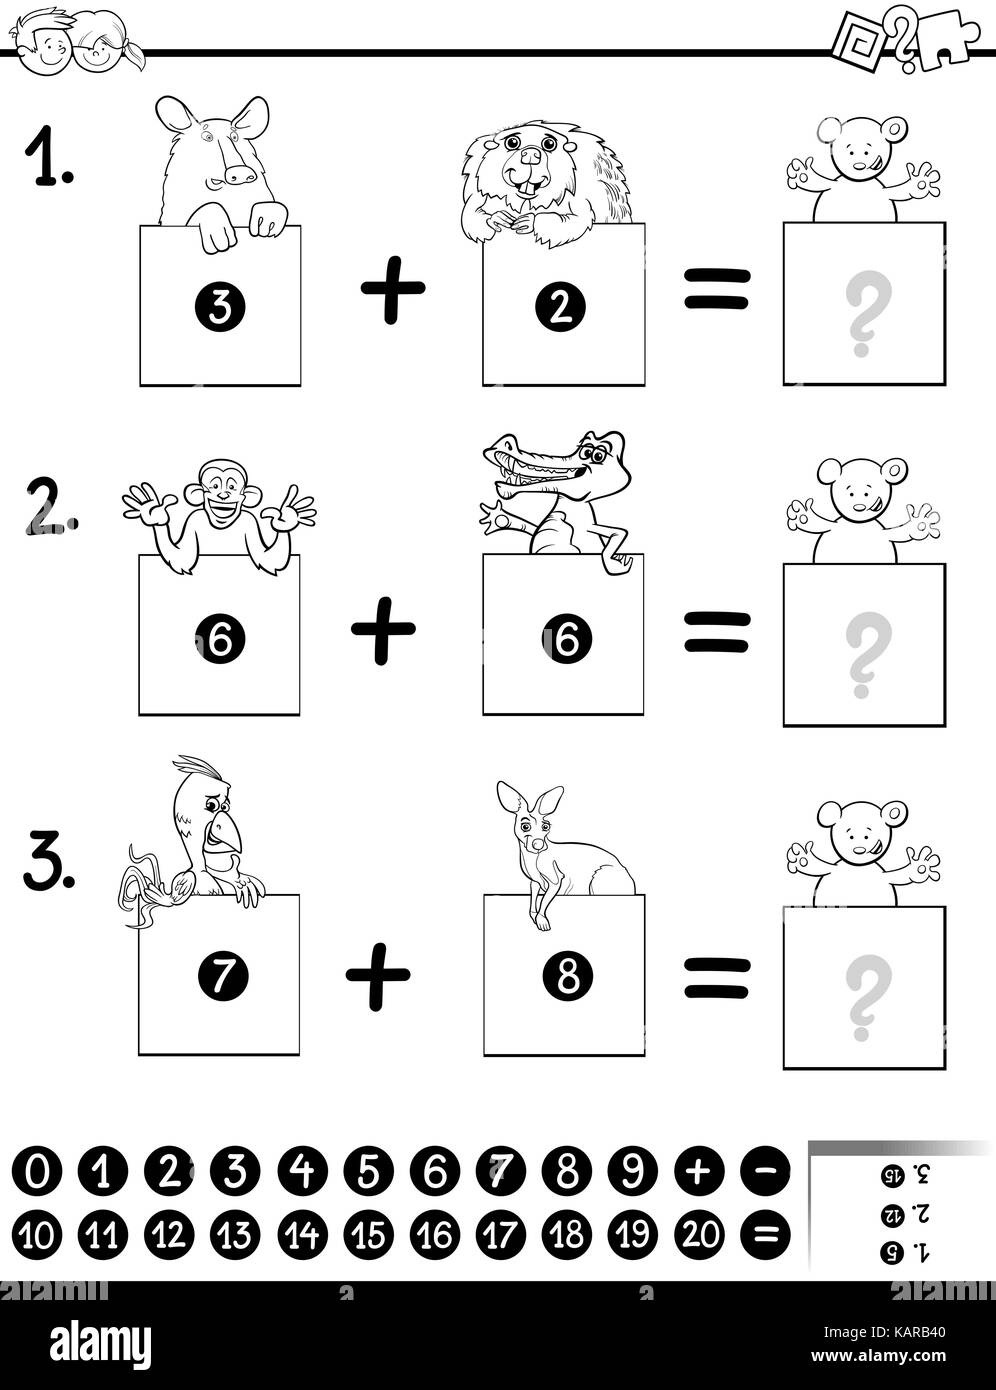 Black and White Cartoon Illustration of Educational Mathematical Addition Activity Game for Children with Wild Animal Characters Coloring Book Stock Vector